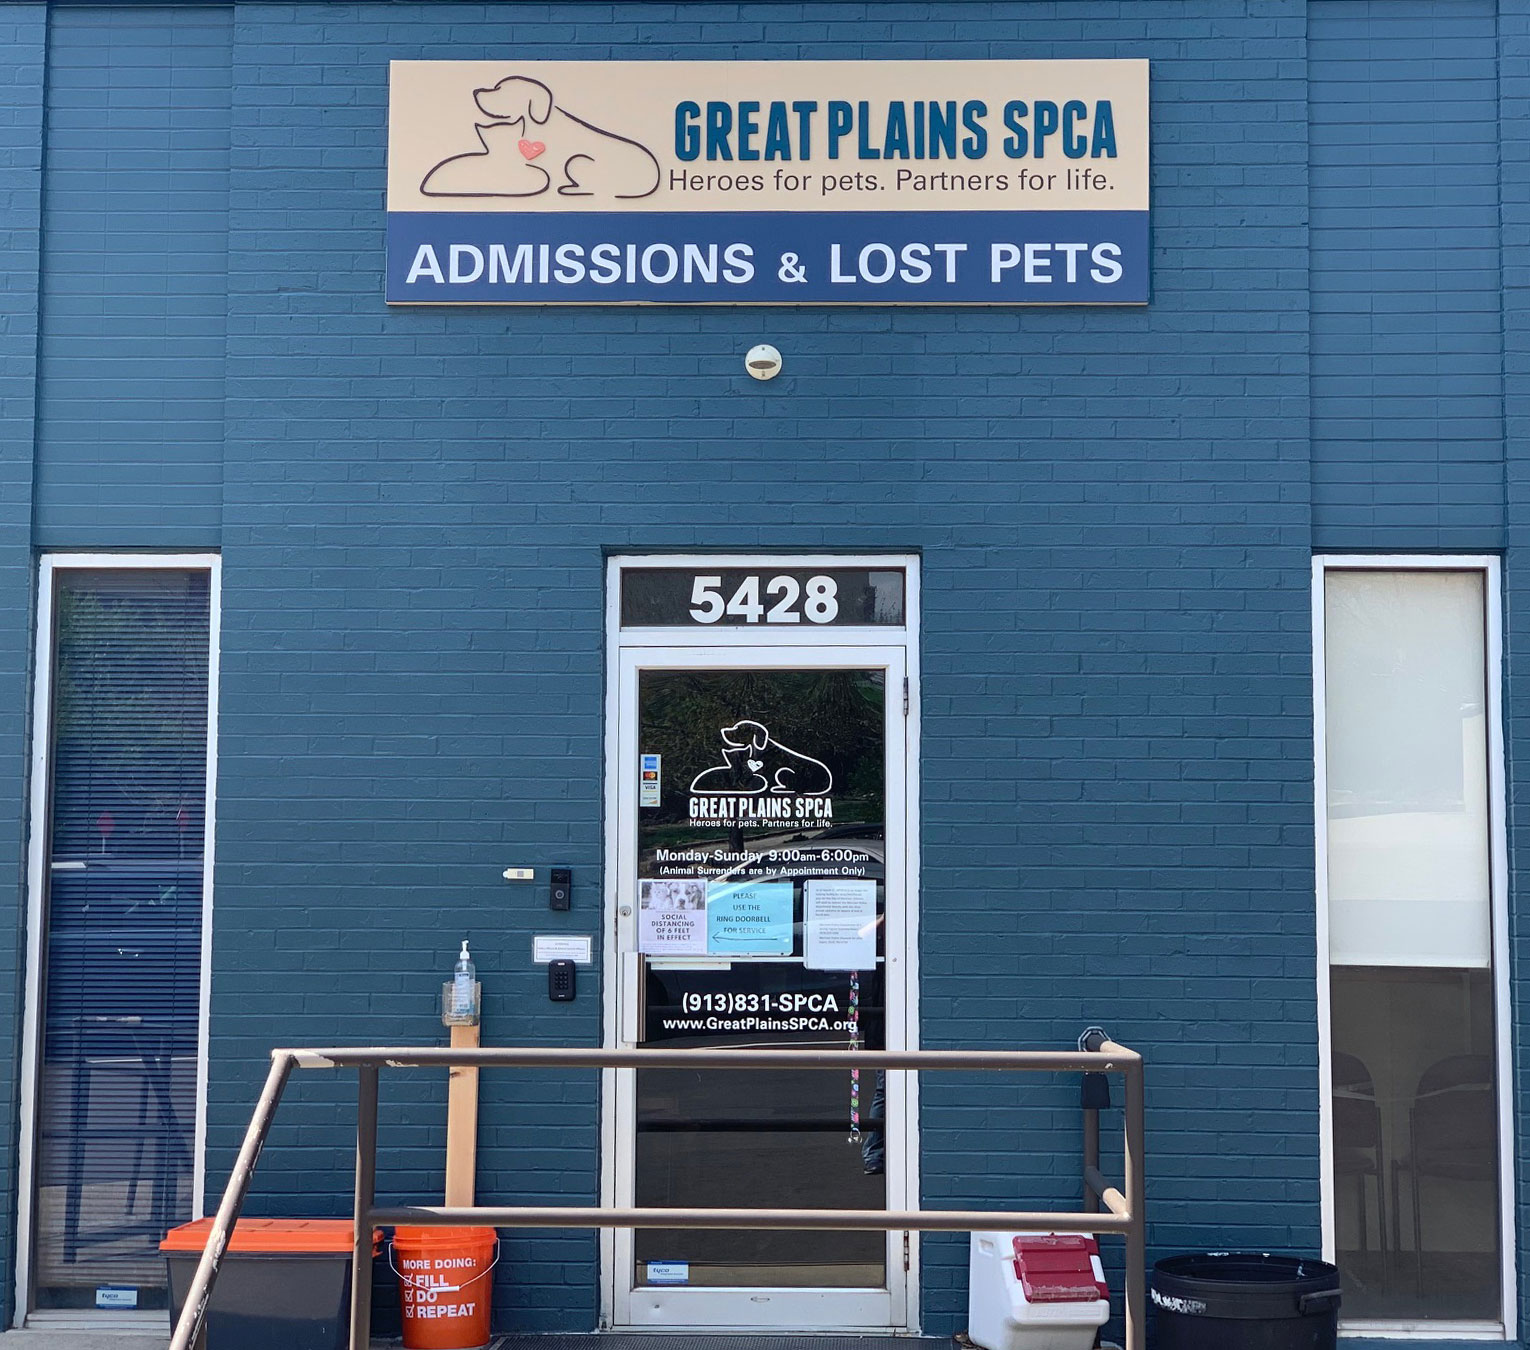 Great Plains SPCA Admissions Lost Pets